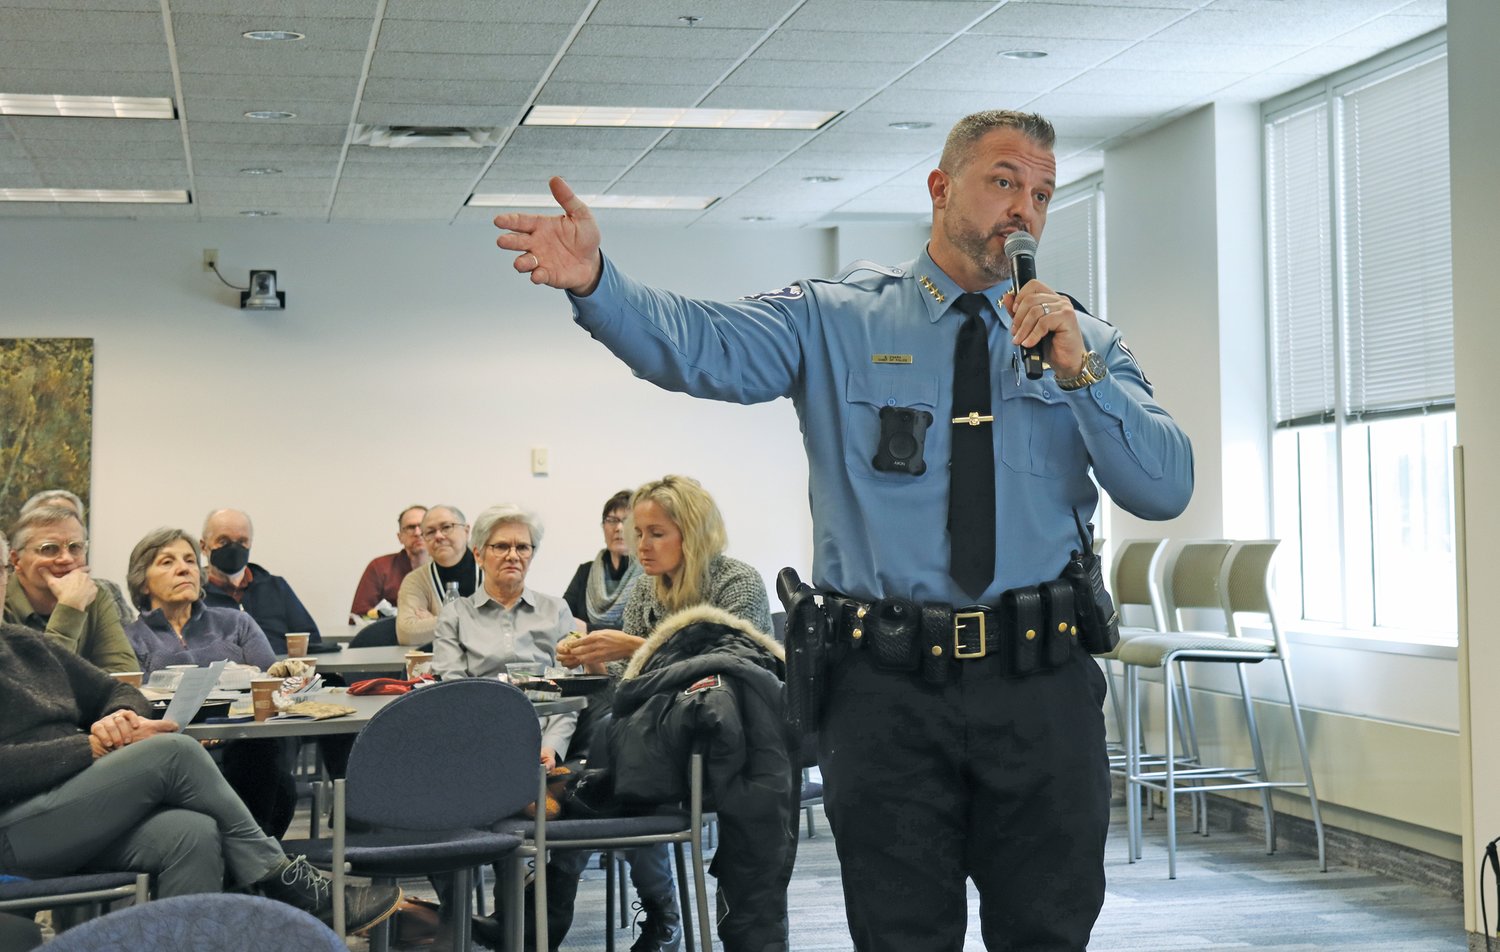 Police Chief Brian O’Hara said, “With the issues we’re facing, we don’t have time for nonsense. We need to get to the point.” He attended the Feb. 1, 2023 Lunch with Lisa held at the University of St. Thomas.